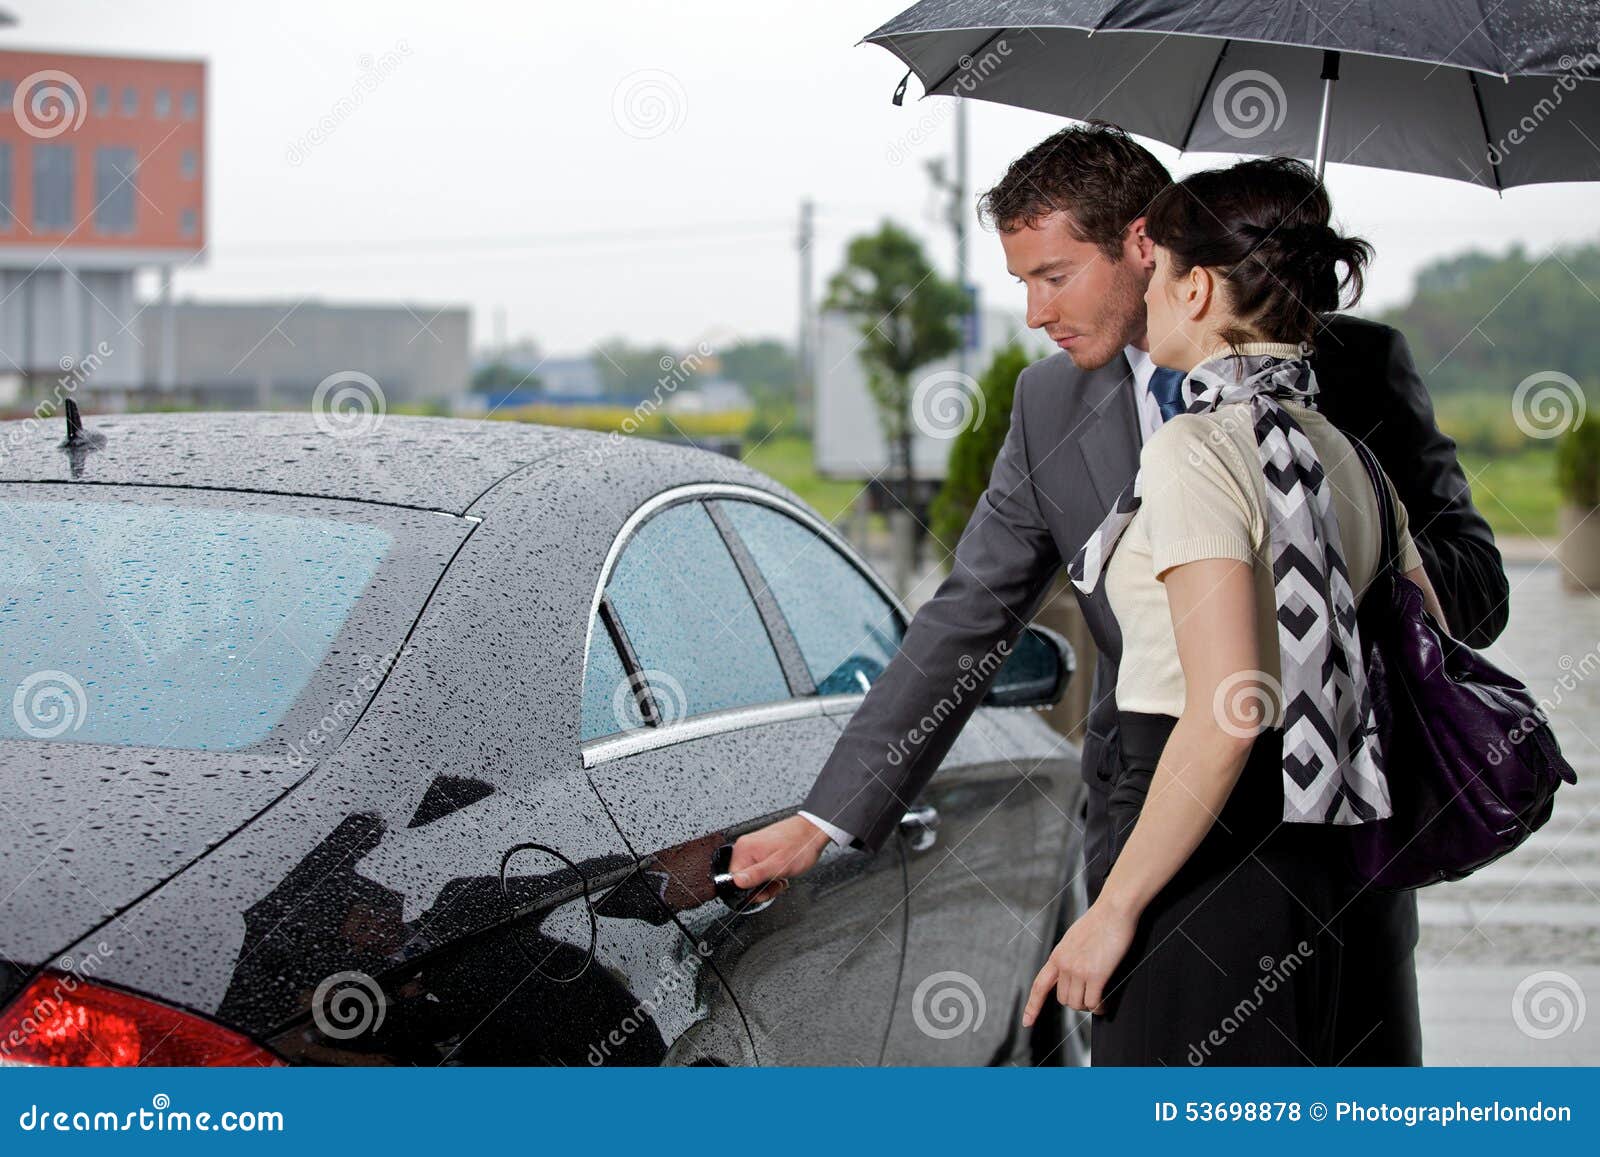 young man opening door of car for woman